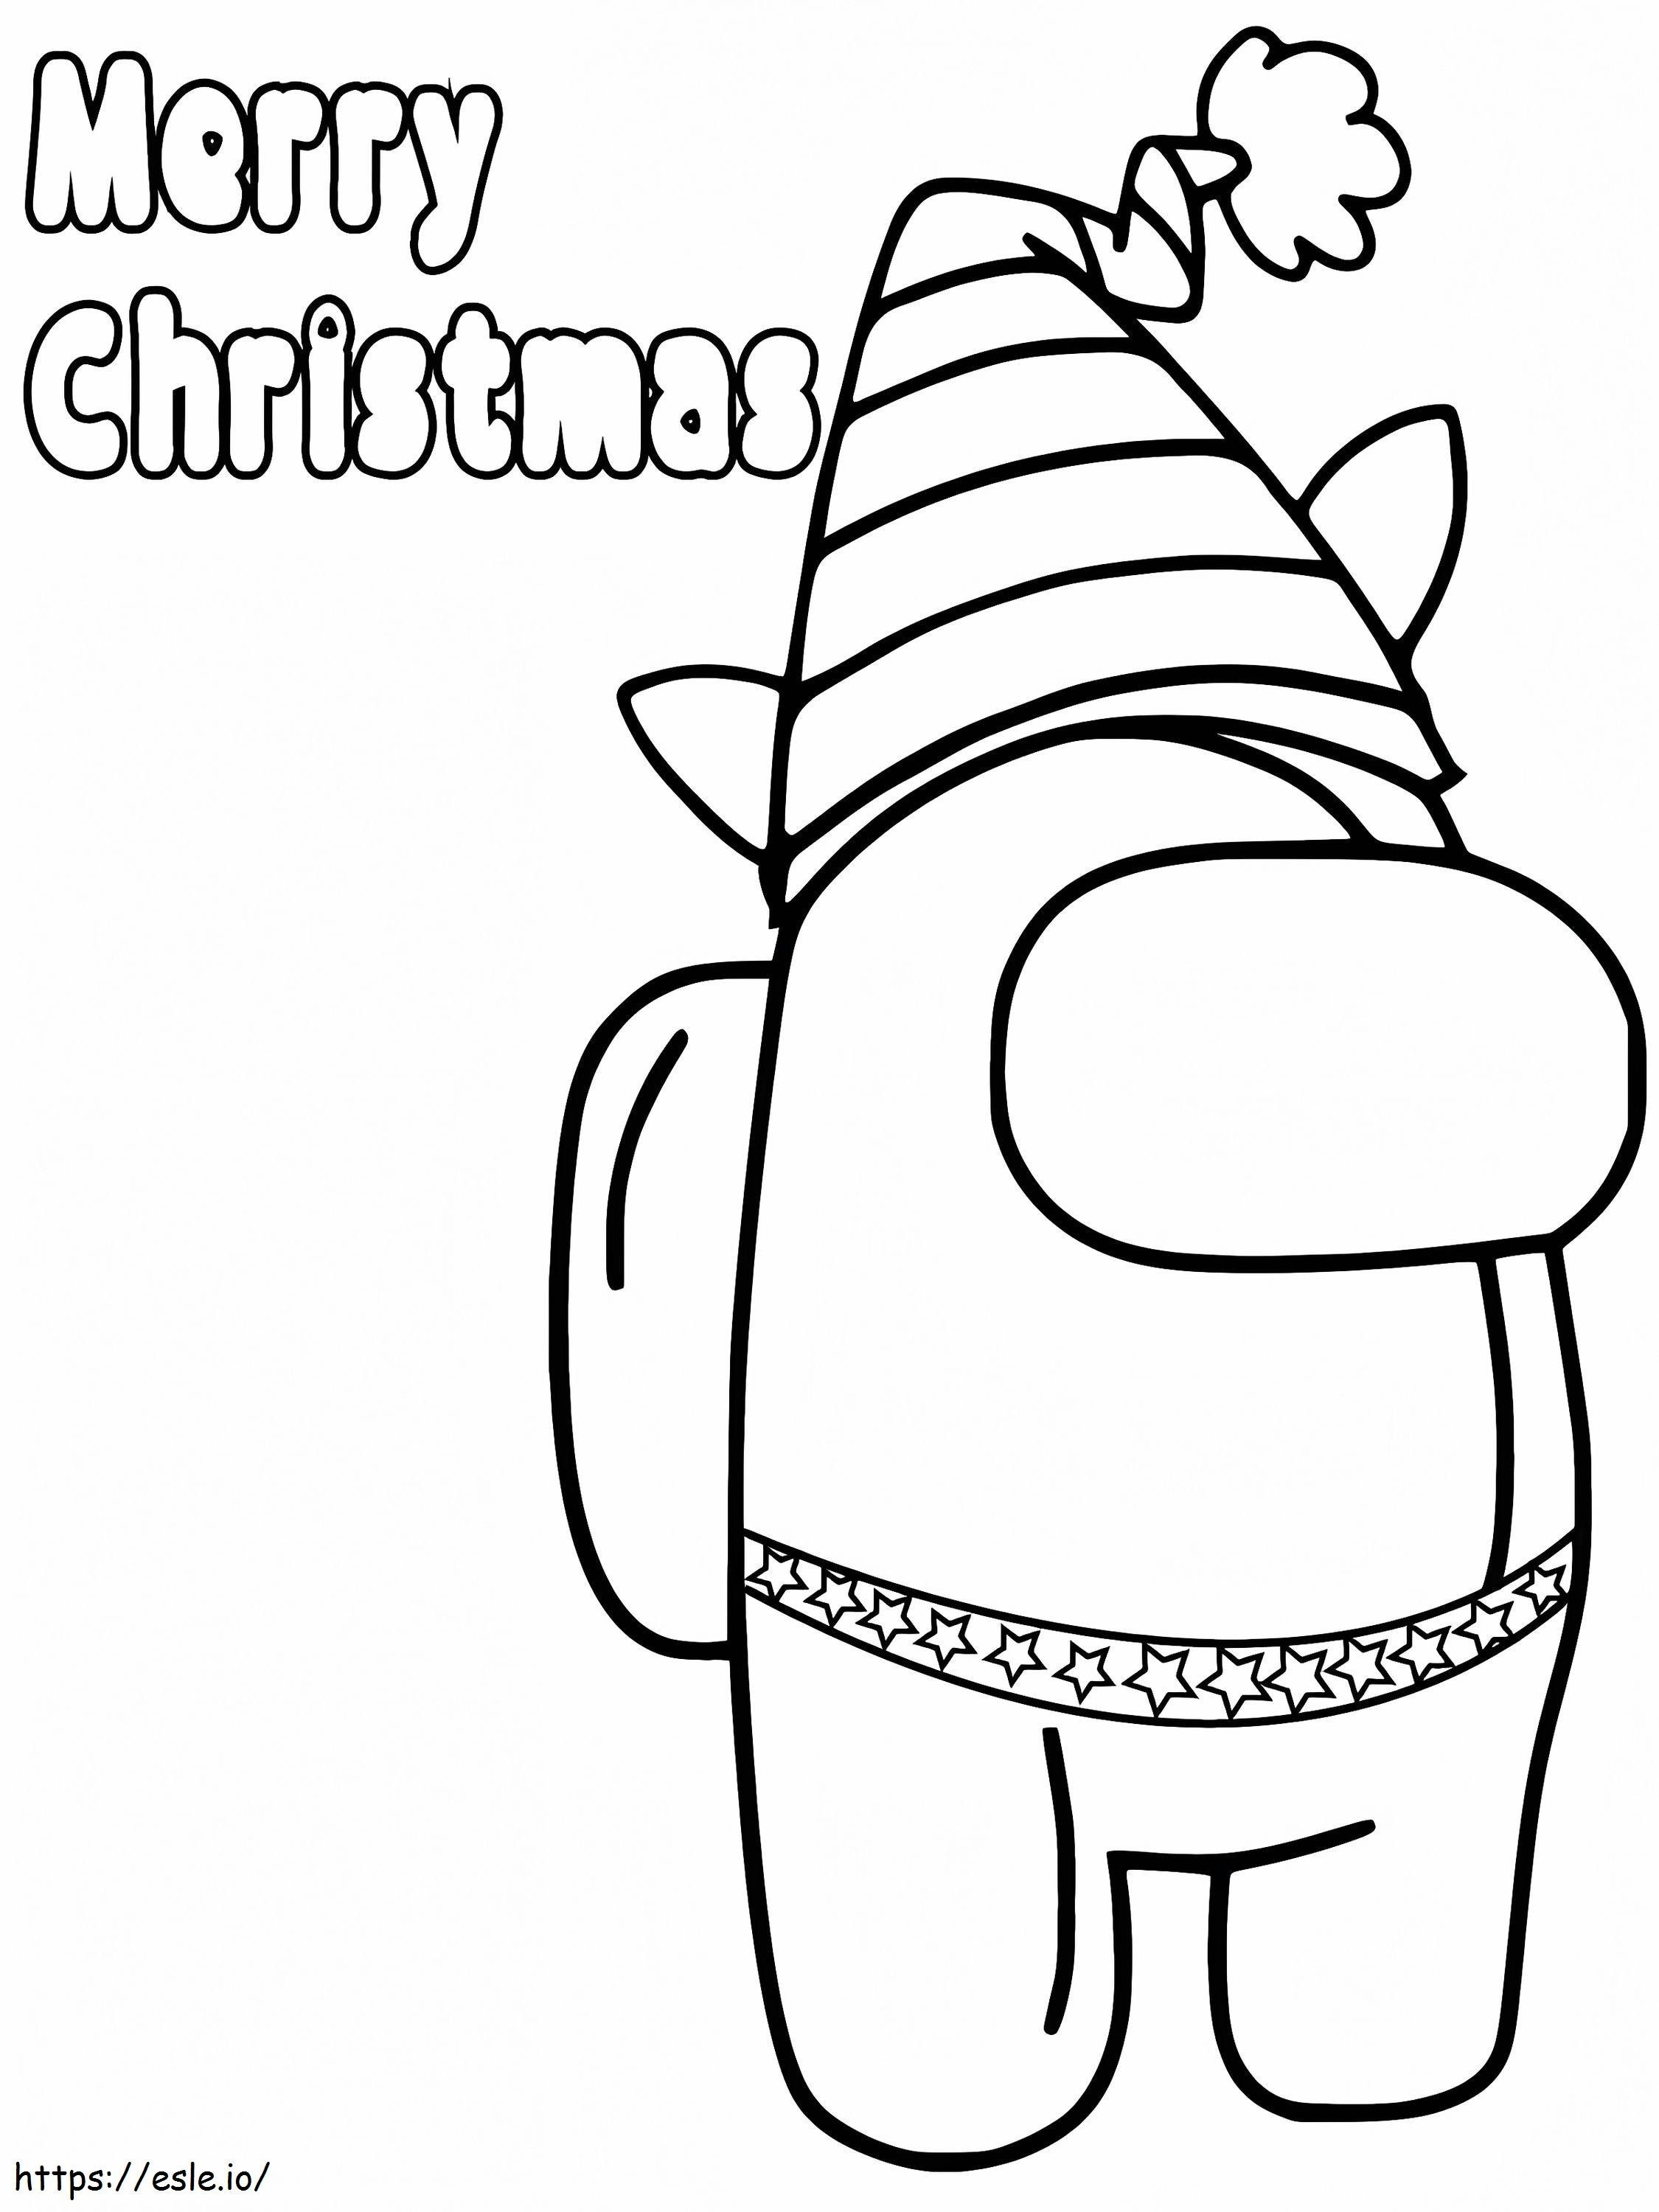 Among Us Merry Christmas Coloring Page 13 coloring page